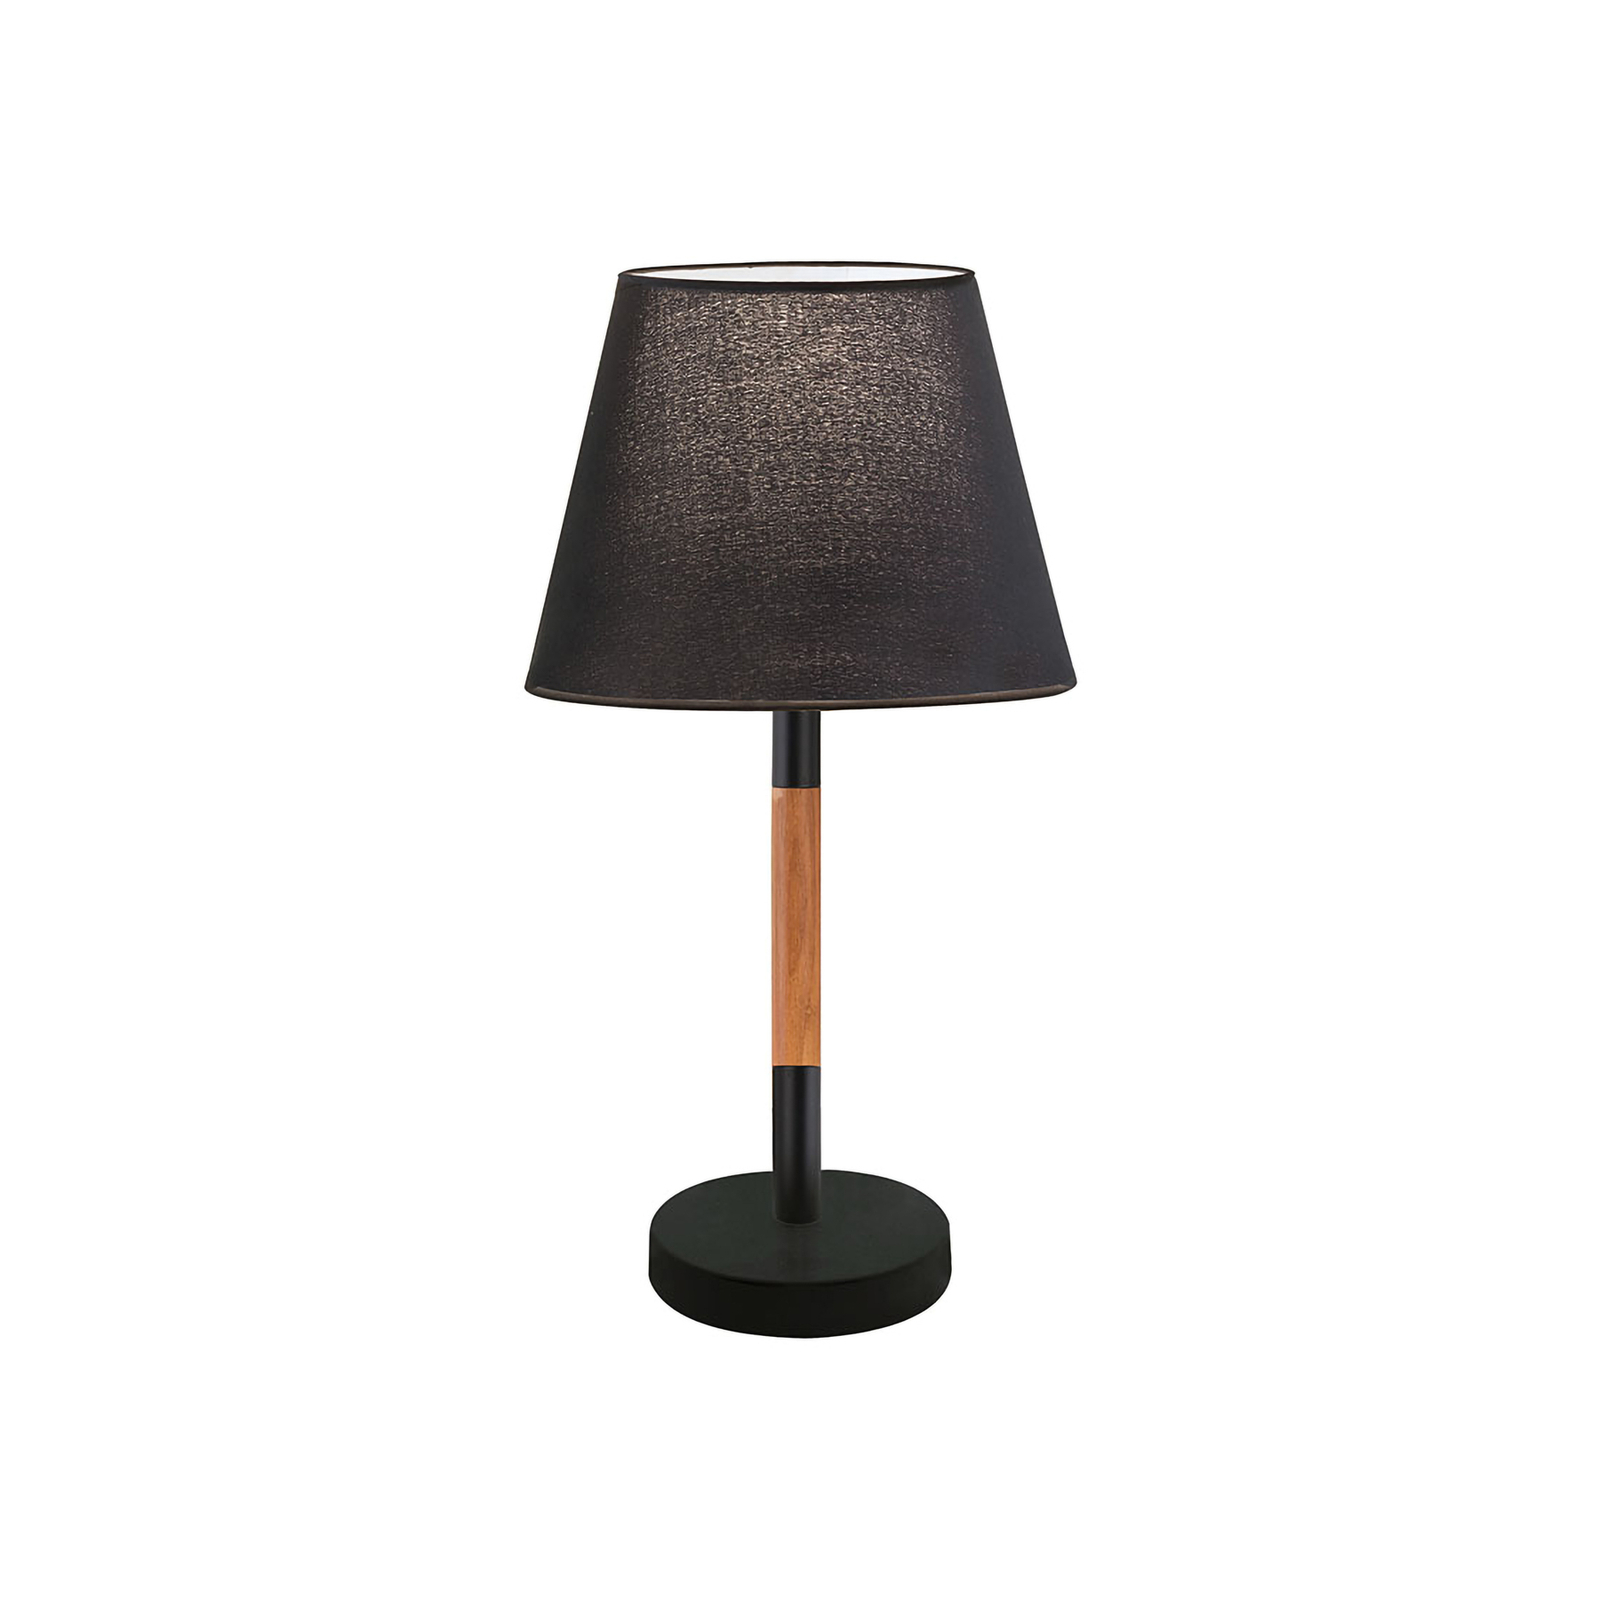 Villy table lamp with a fabric lampshade